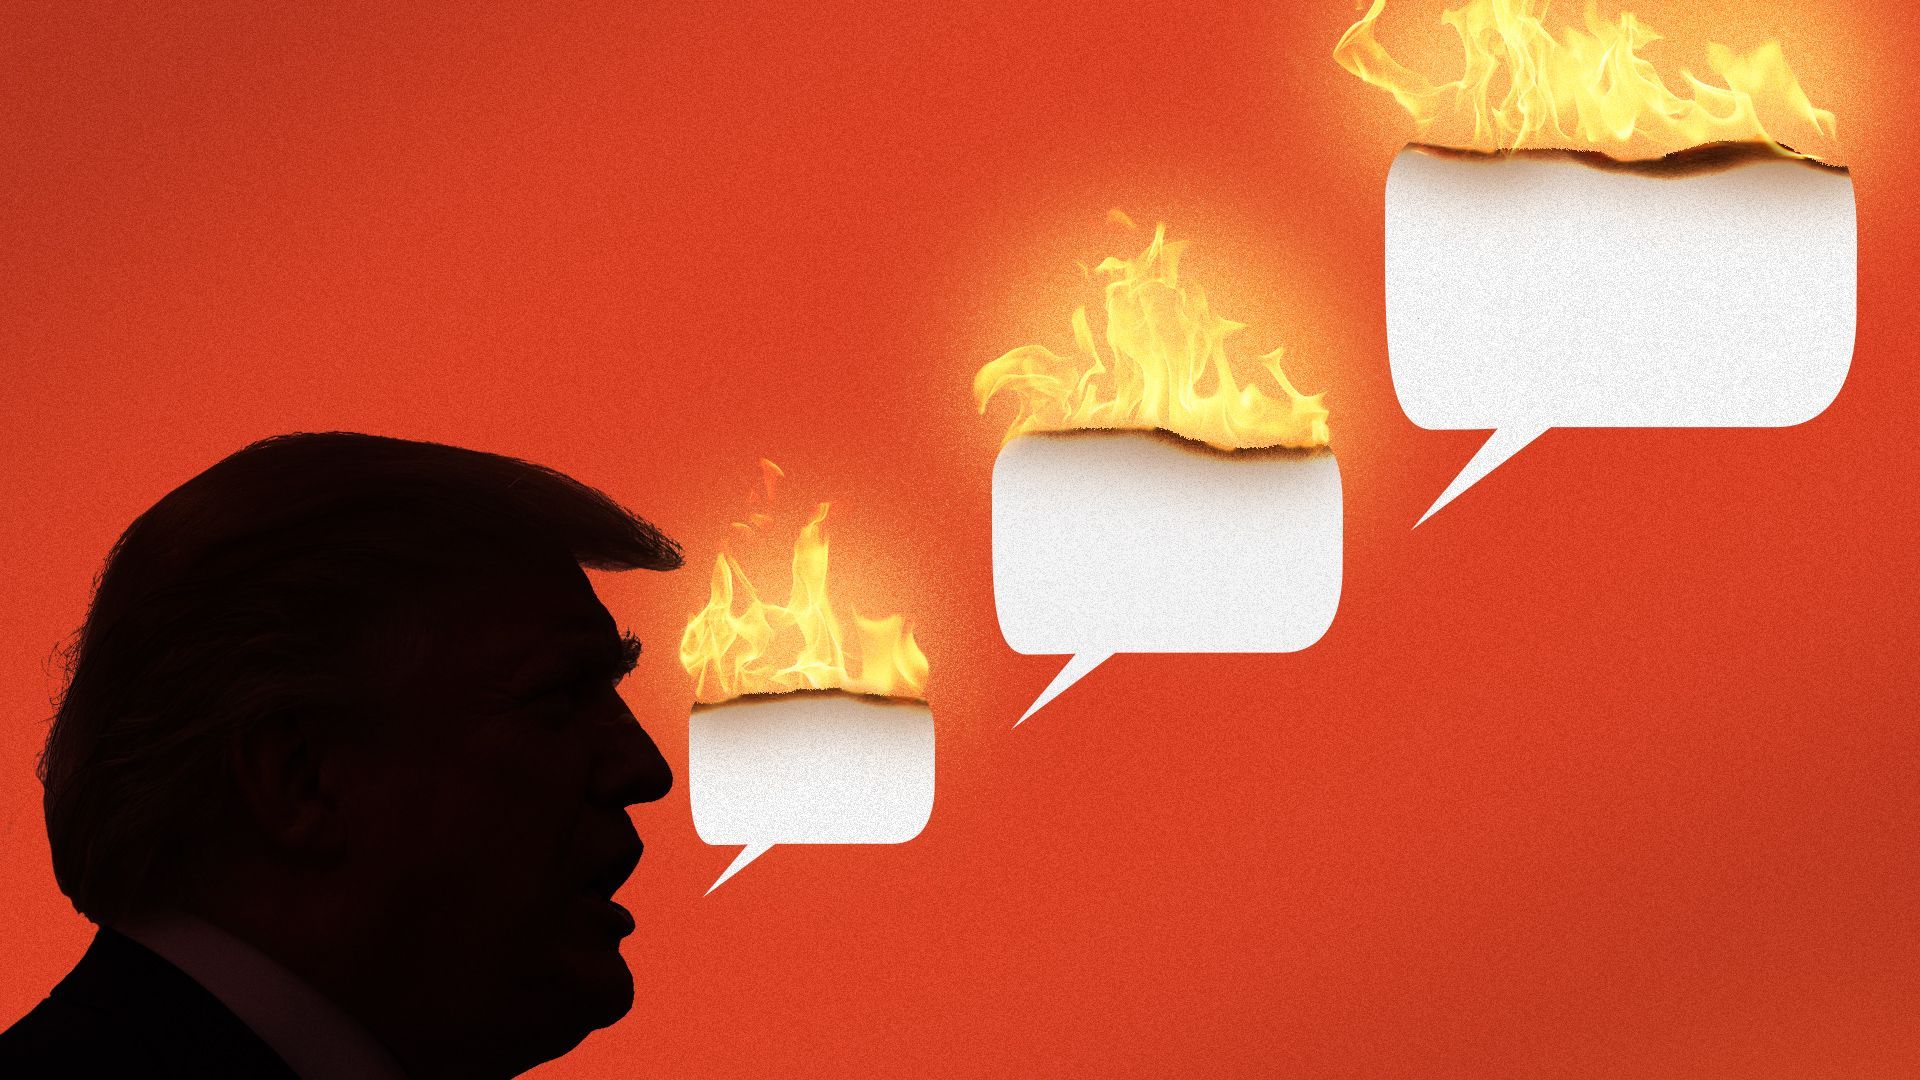 Photo illustration of Donald Trump with speech bubbles coming out of his mouth getting progressively larger. The speech bubbles are all on fire and burnt around the edges. 